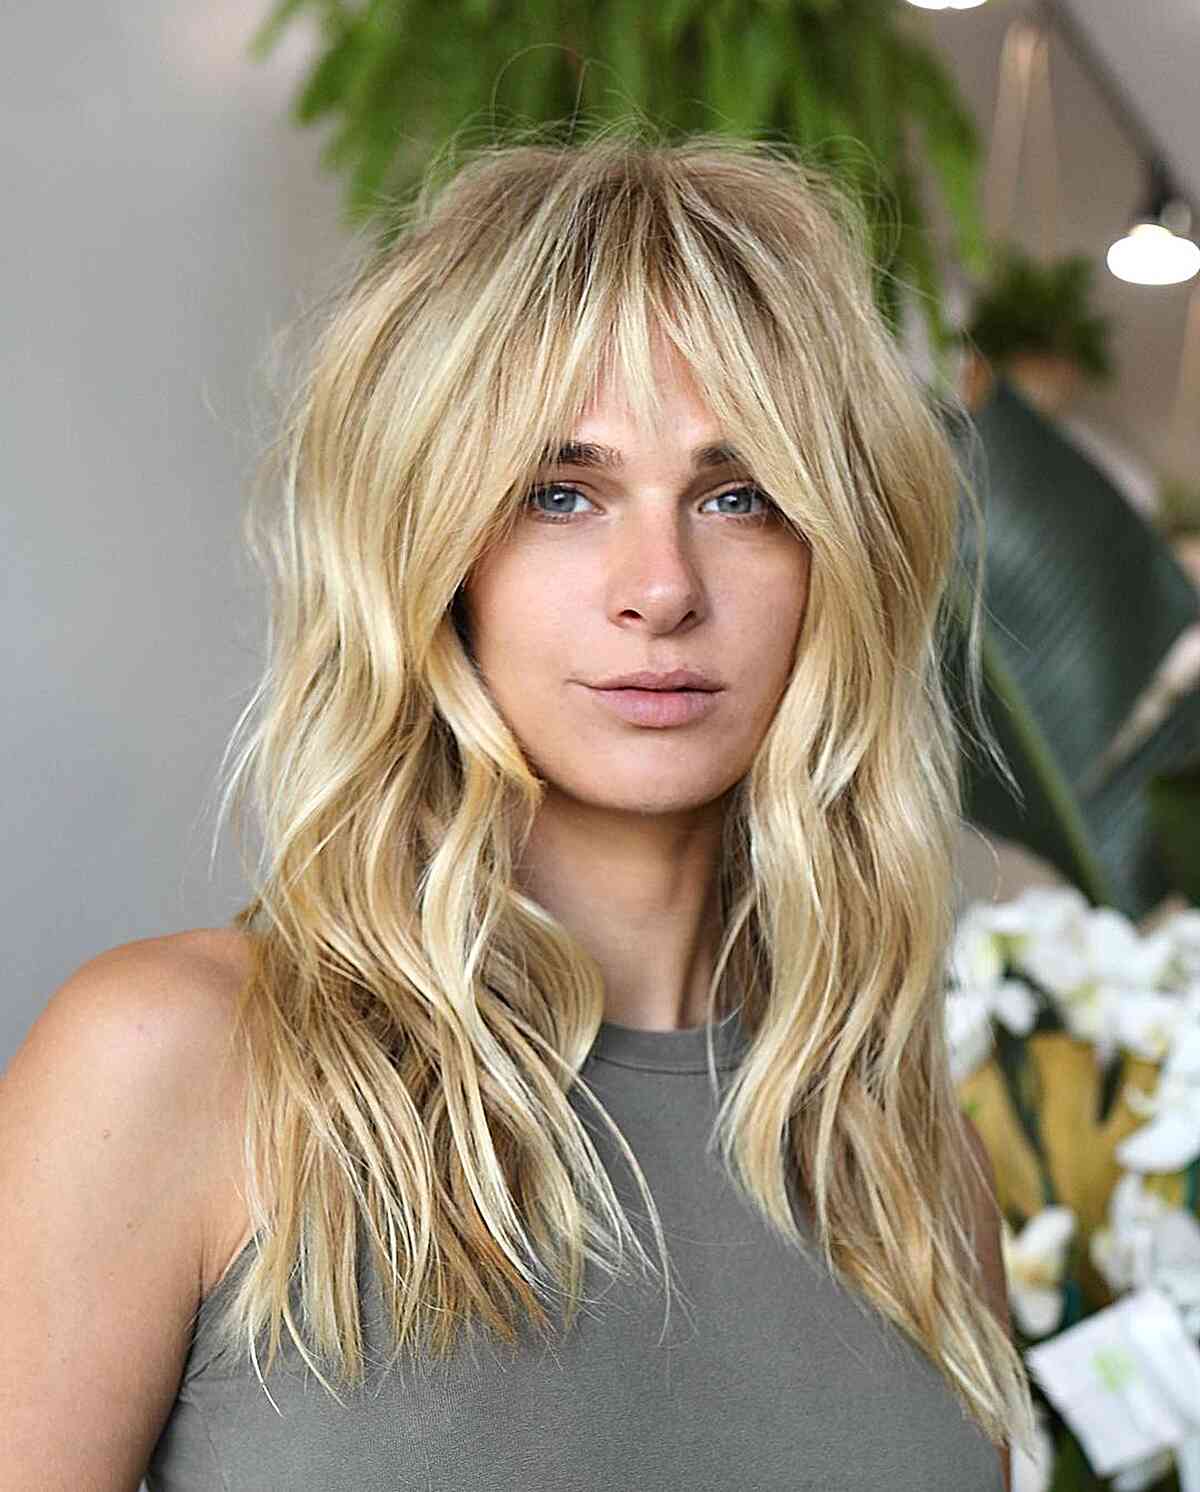 Top 10 Front Hair Face Framing Cut For Girls You Need To Try